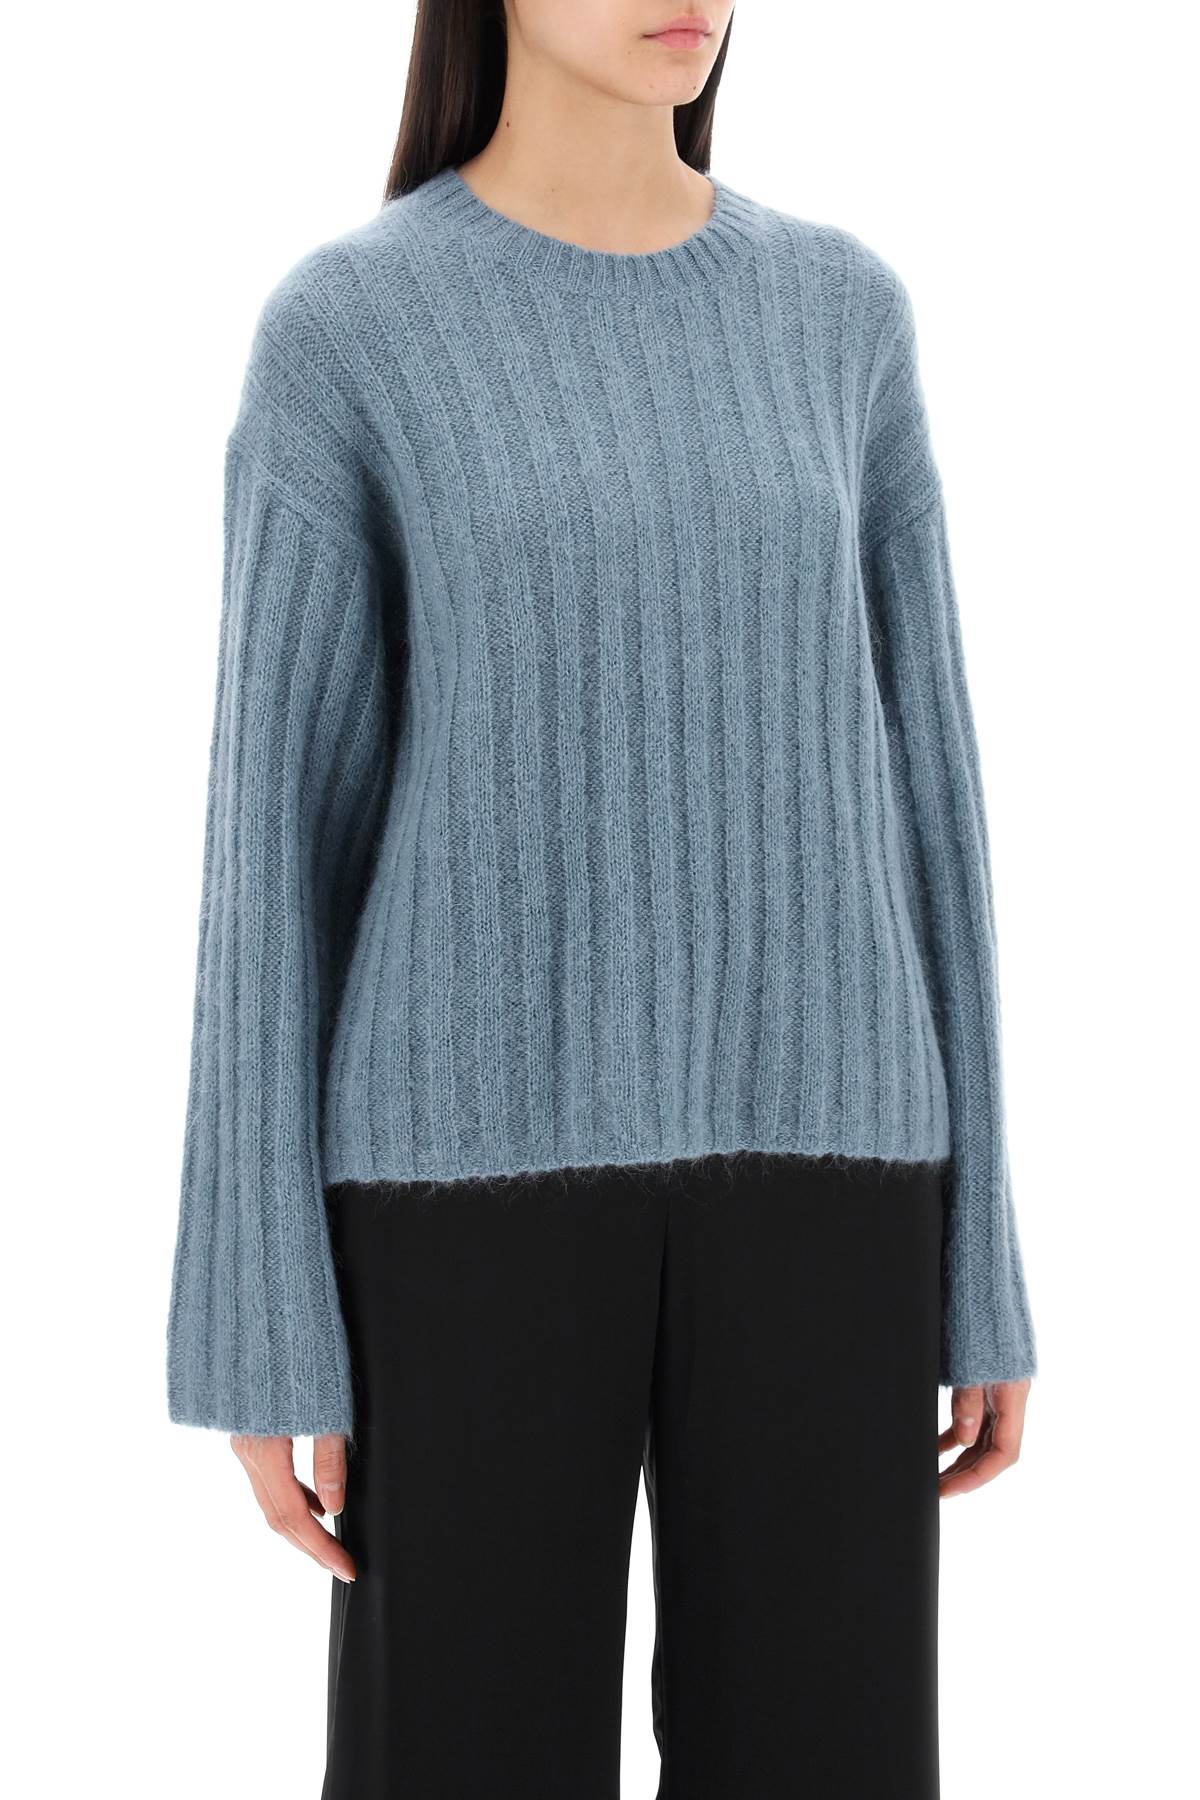 By Malene Birger Ribbed Knit Pullover Sweater   Light Blue